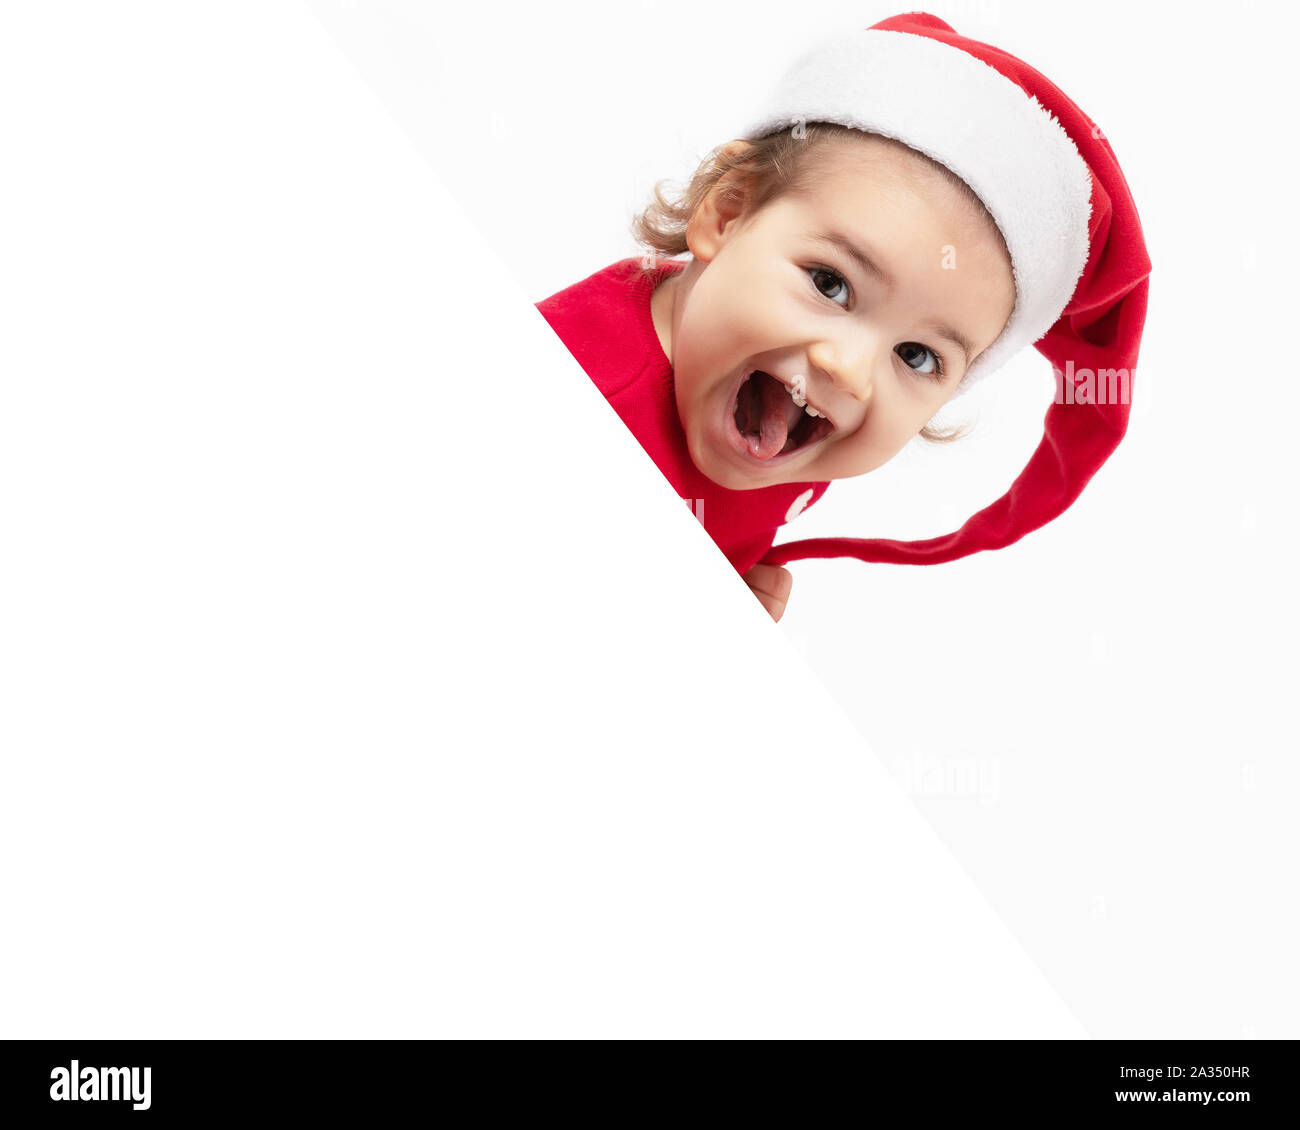 Adorable baby girl is happy smiling for christmas. Stock Photo